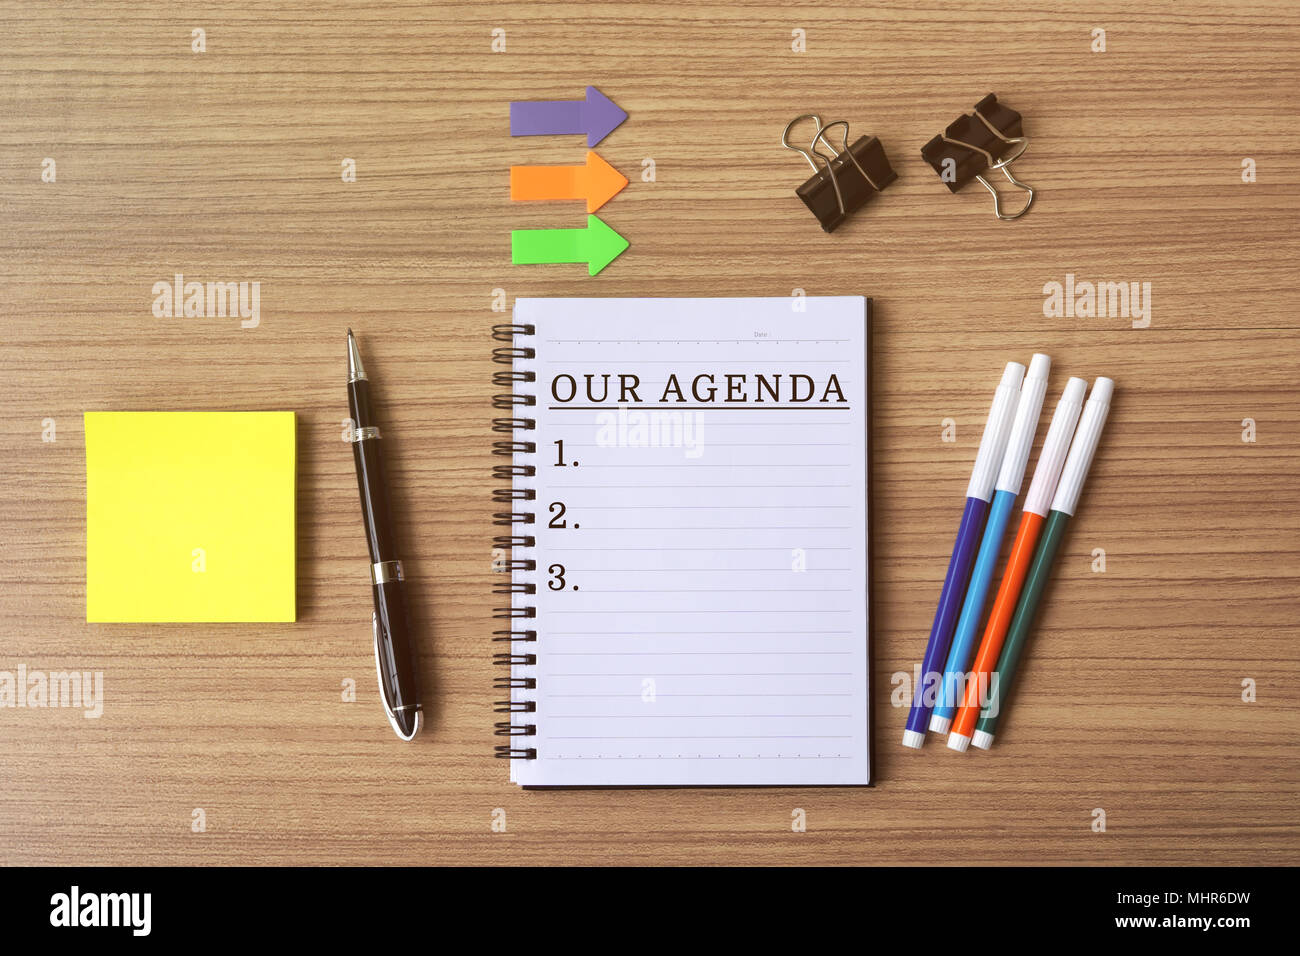 Our agenda list text on notepad, flat lay business office desk. Stock Photo